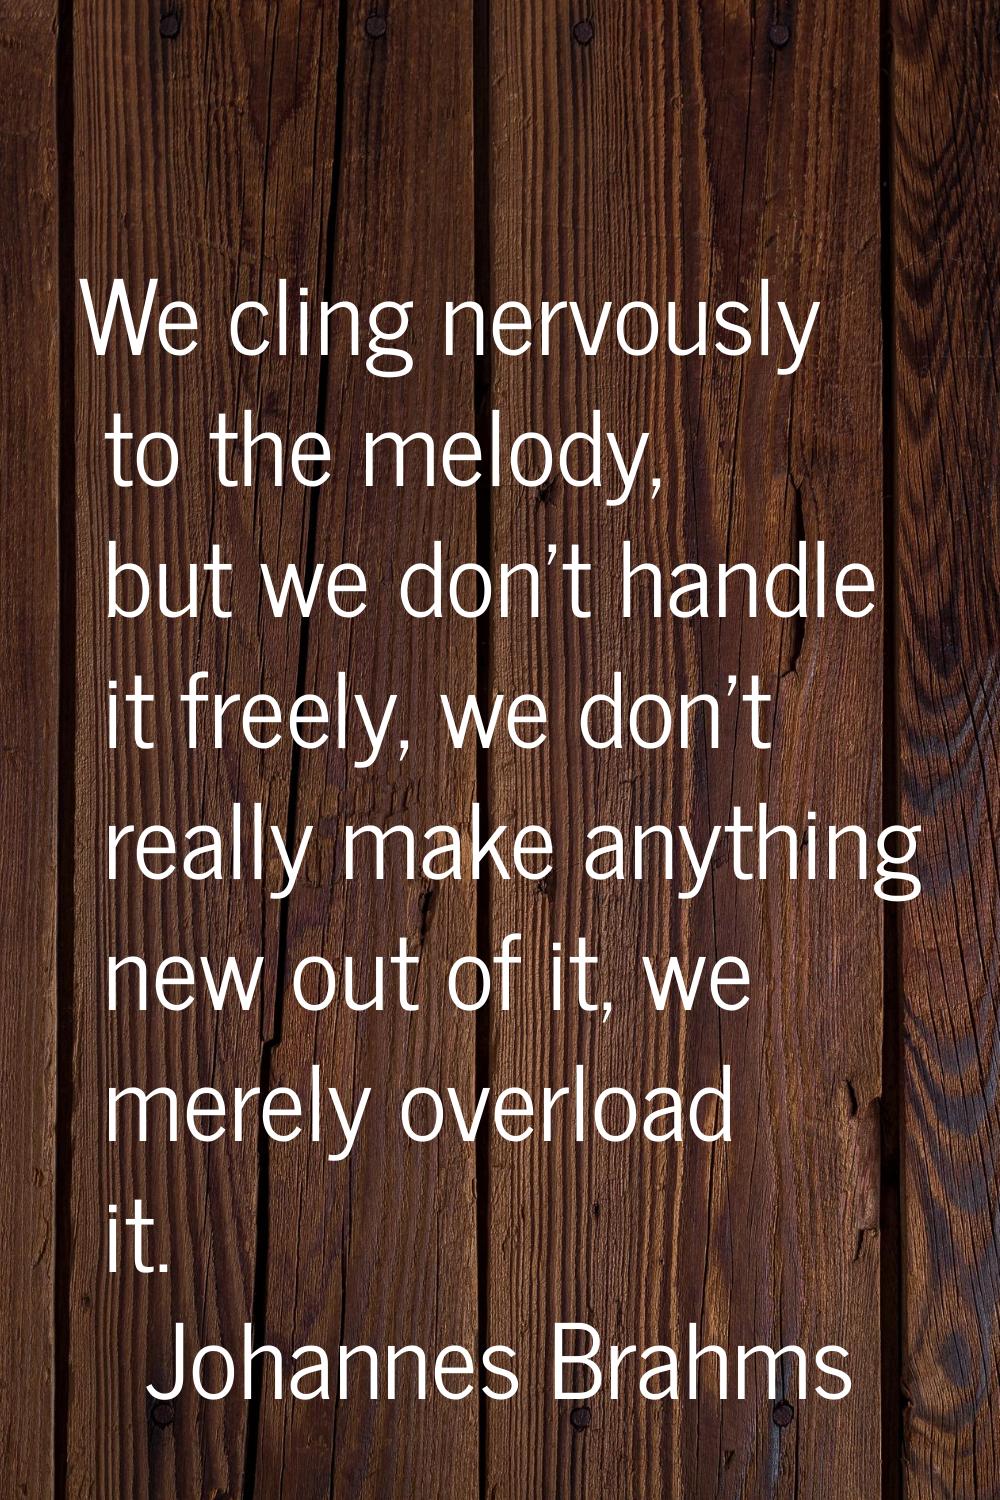 We cling nervously to the melody, but we don't handle it freely, we don't really make anything new 